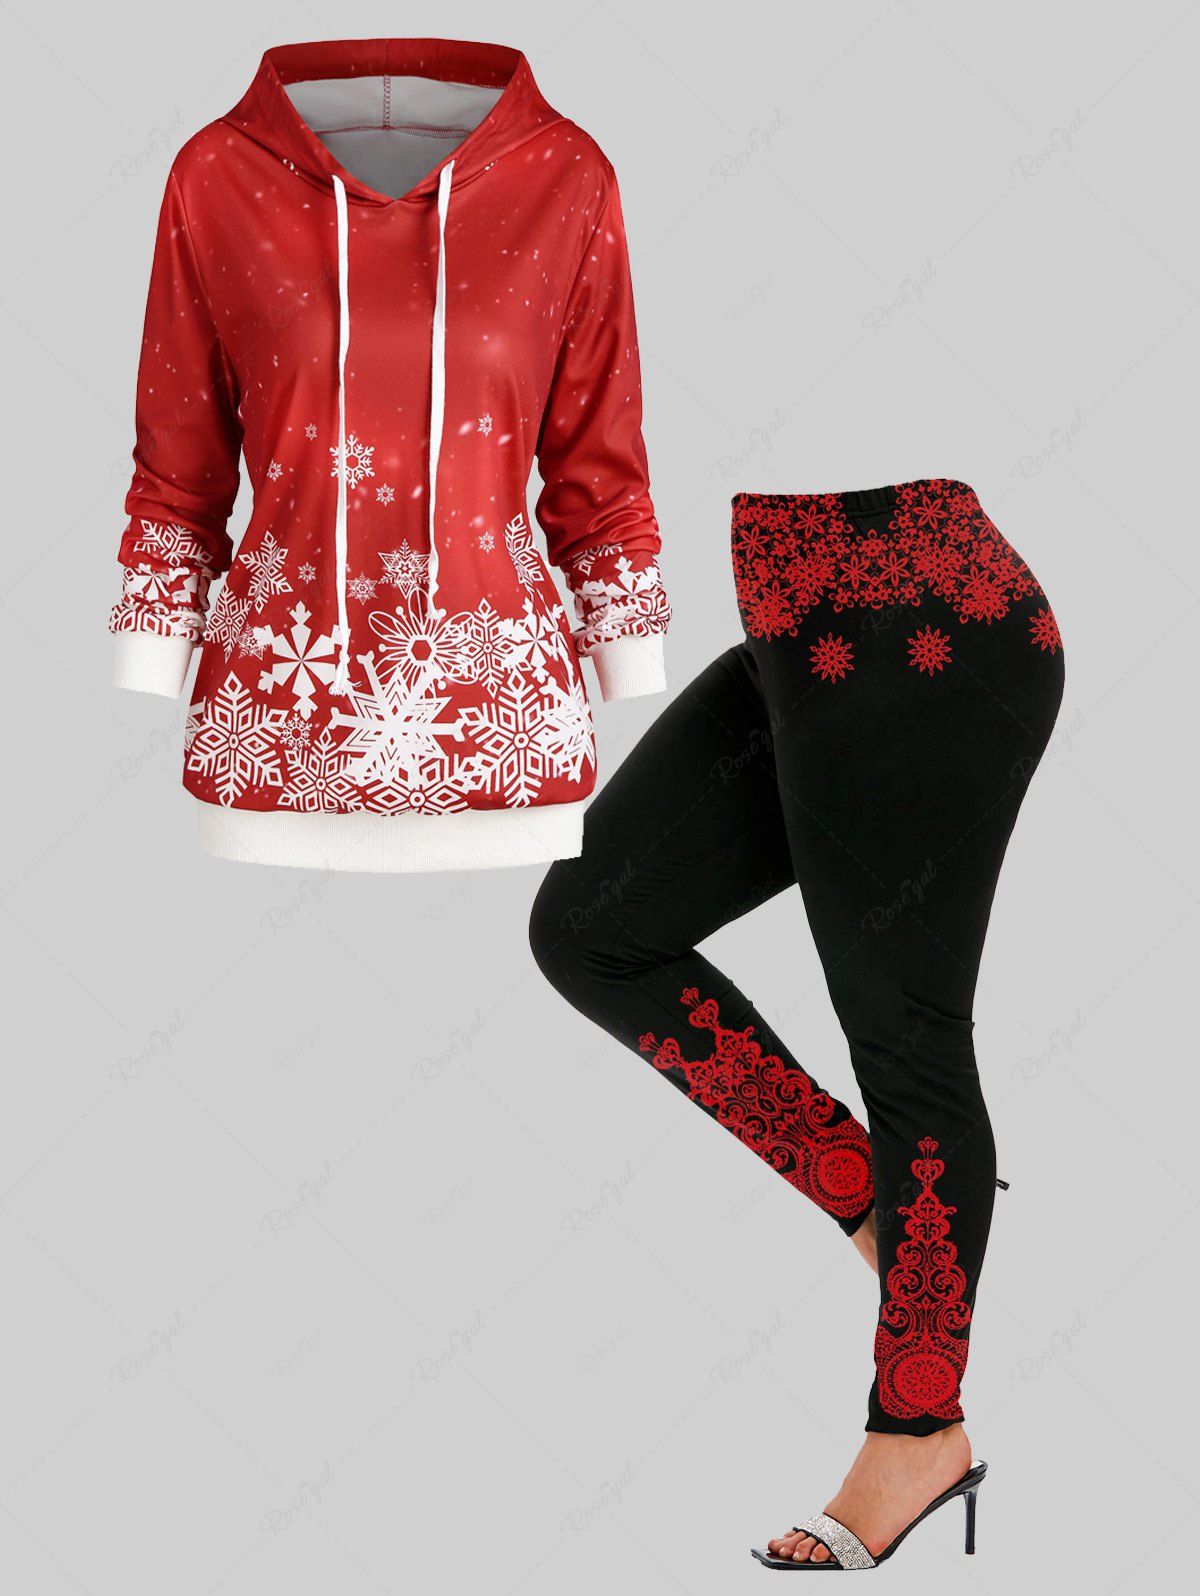 Discount Snowflake Print Christmas Hoodie and Graphic Leggings Plus Size Christmas Outerwear Outfit  